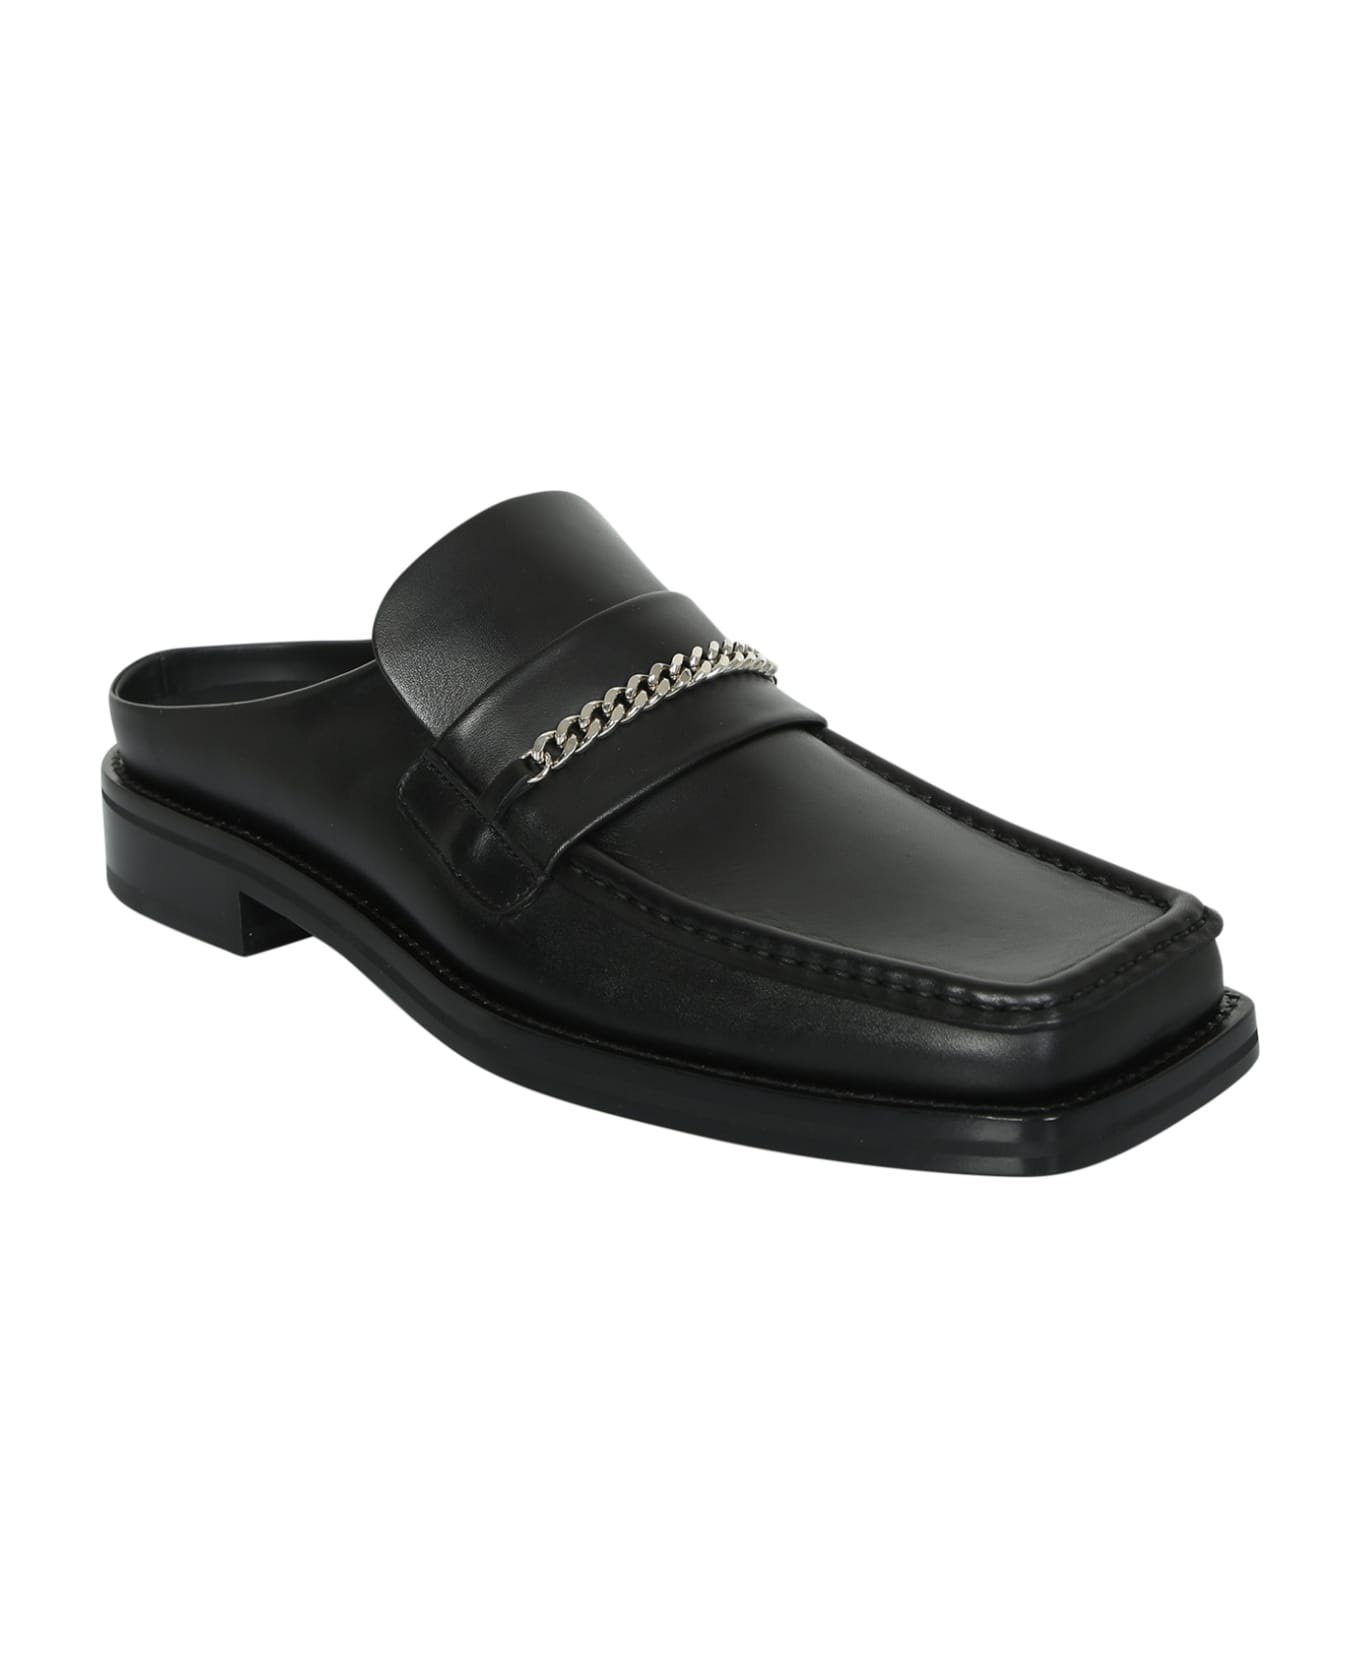 Martine Rose Chain-embellished Slip-on Loafers - Black その他各種シューズ